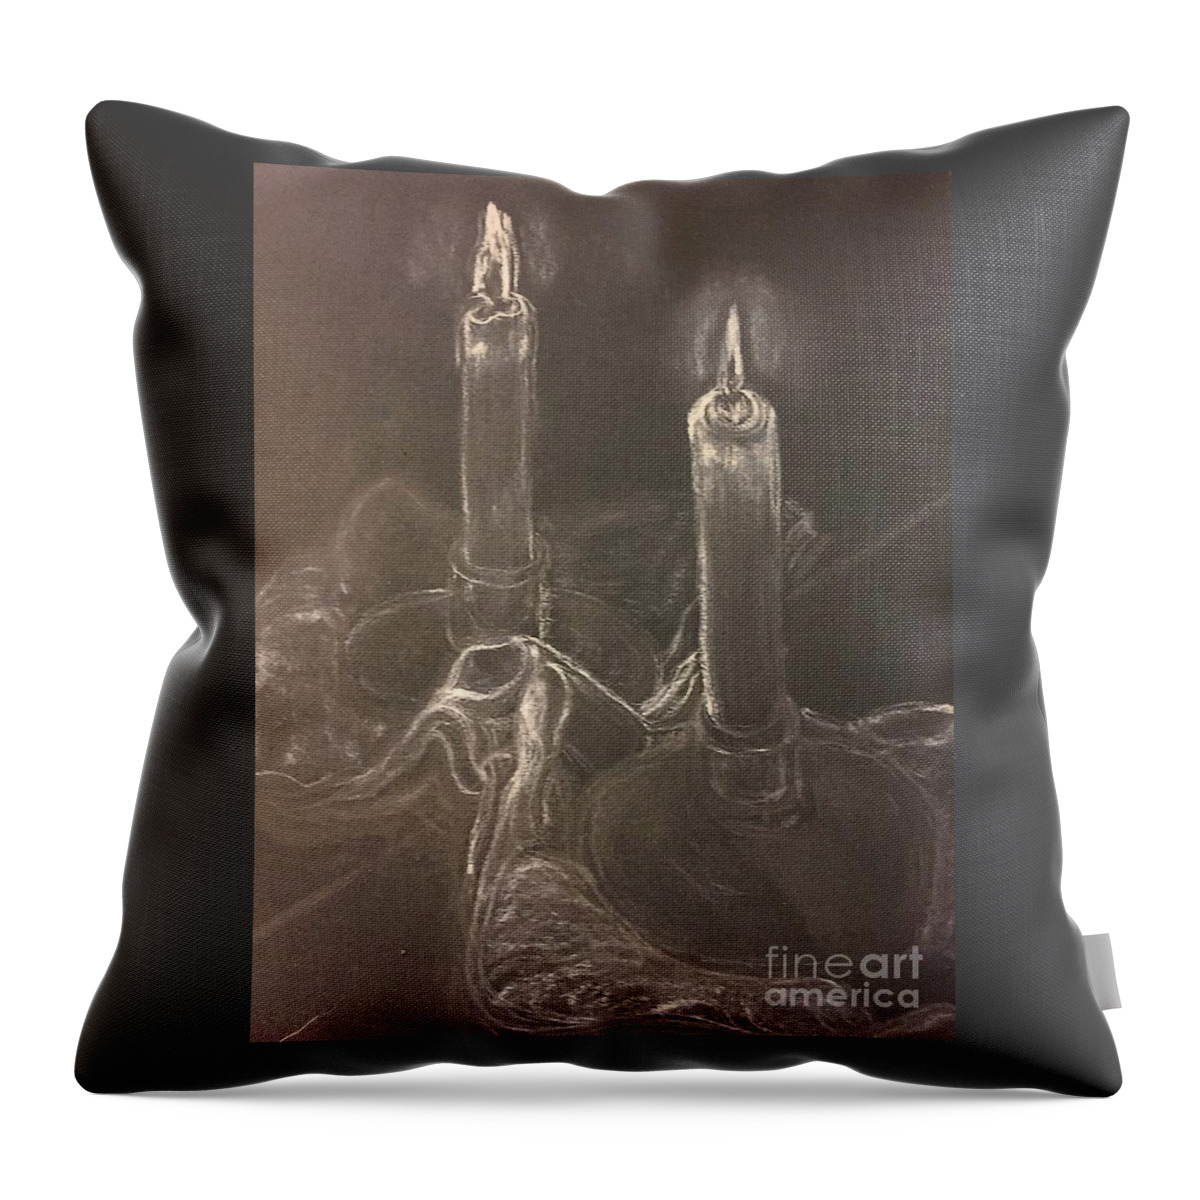  Throw Pillow featuring the photograph Believing Mirror by Mary Kobet